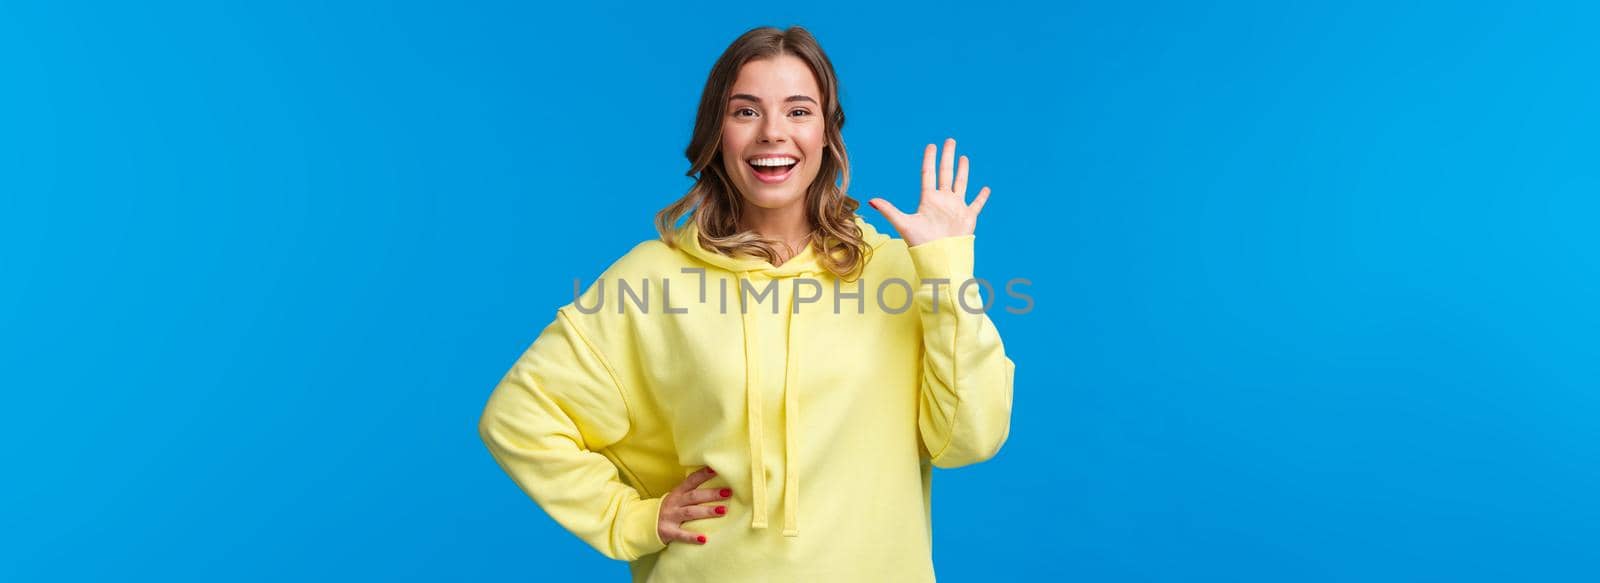 Cheerful friendly outgoing blond girl waving hand, informal greeting concept, smiling white teeth saying hi, welcoming new members to company, see friend, stand blue background.